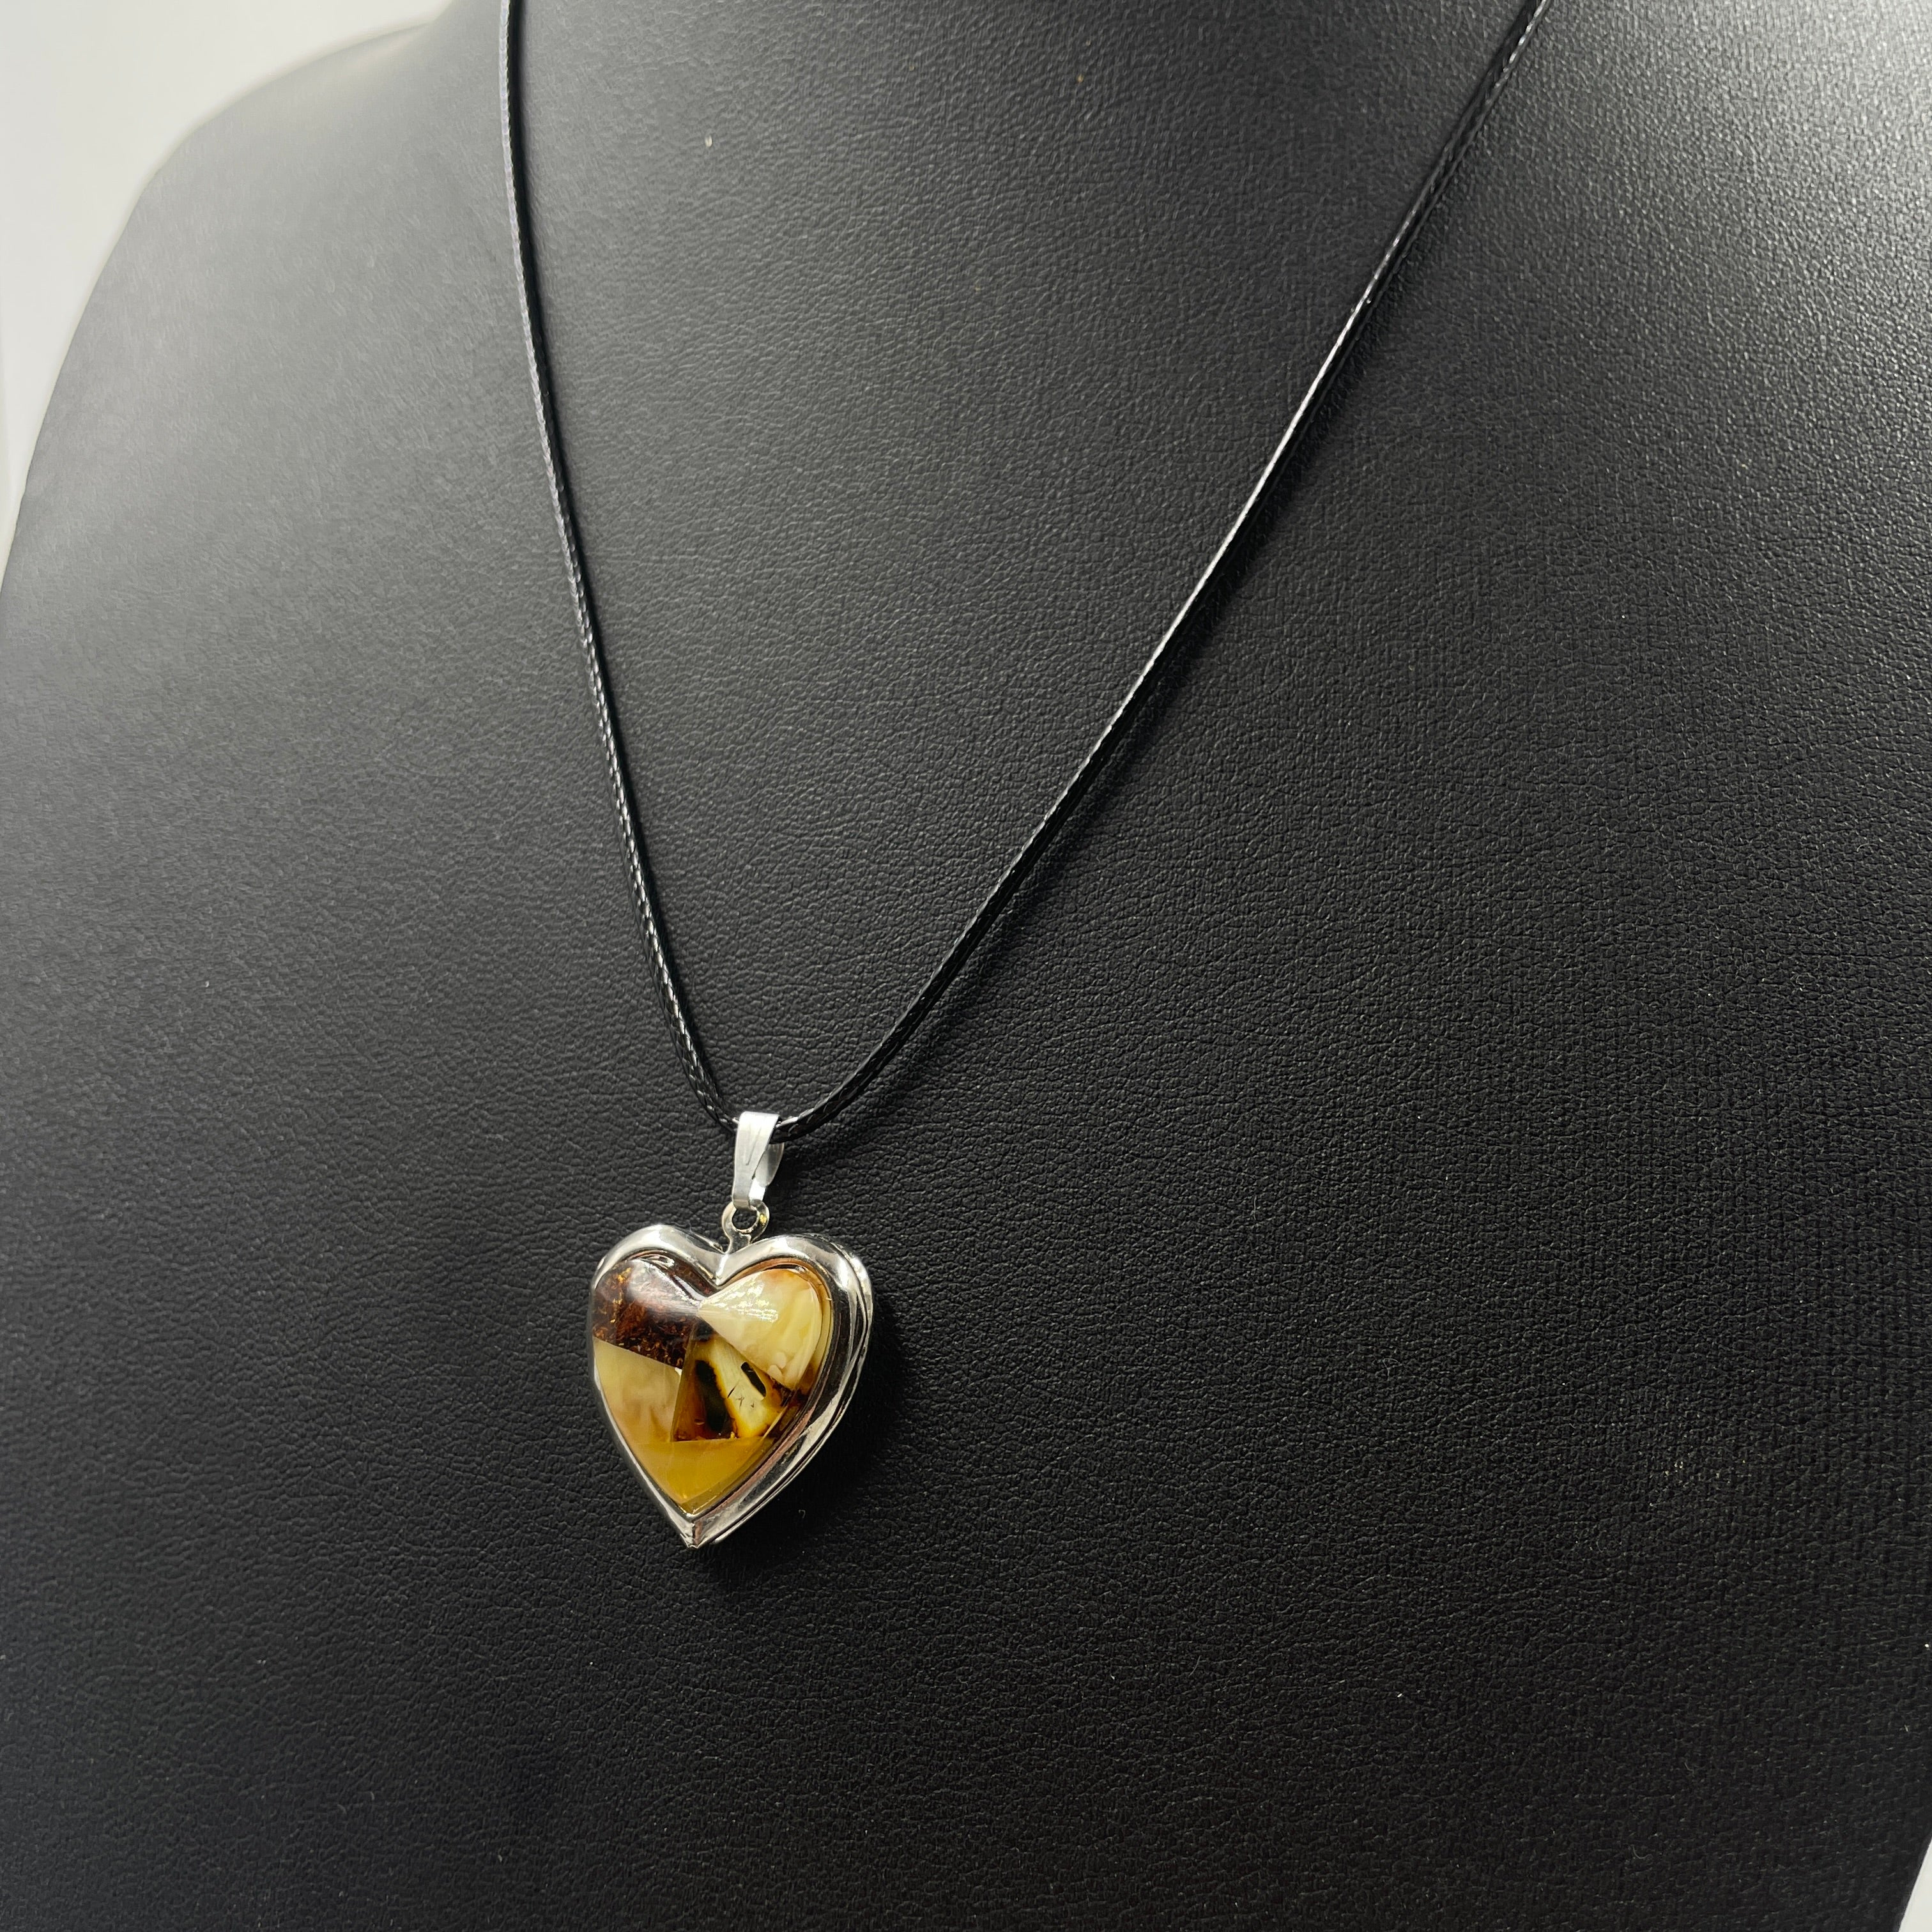 Pendant on the neck with a heart